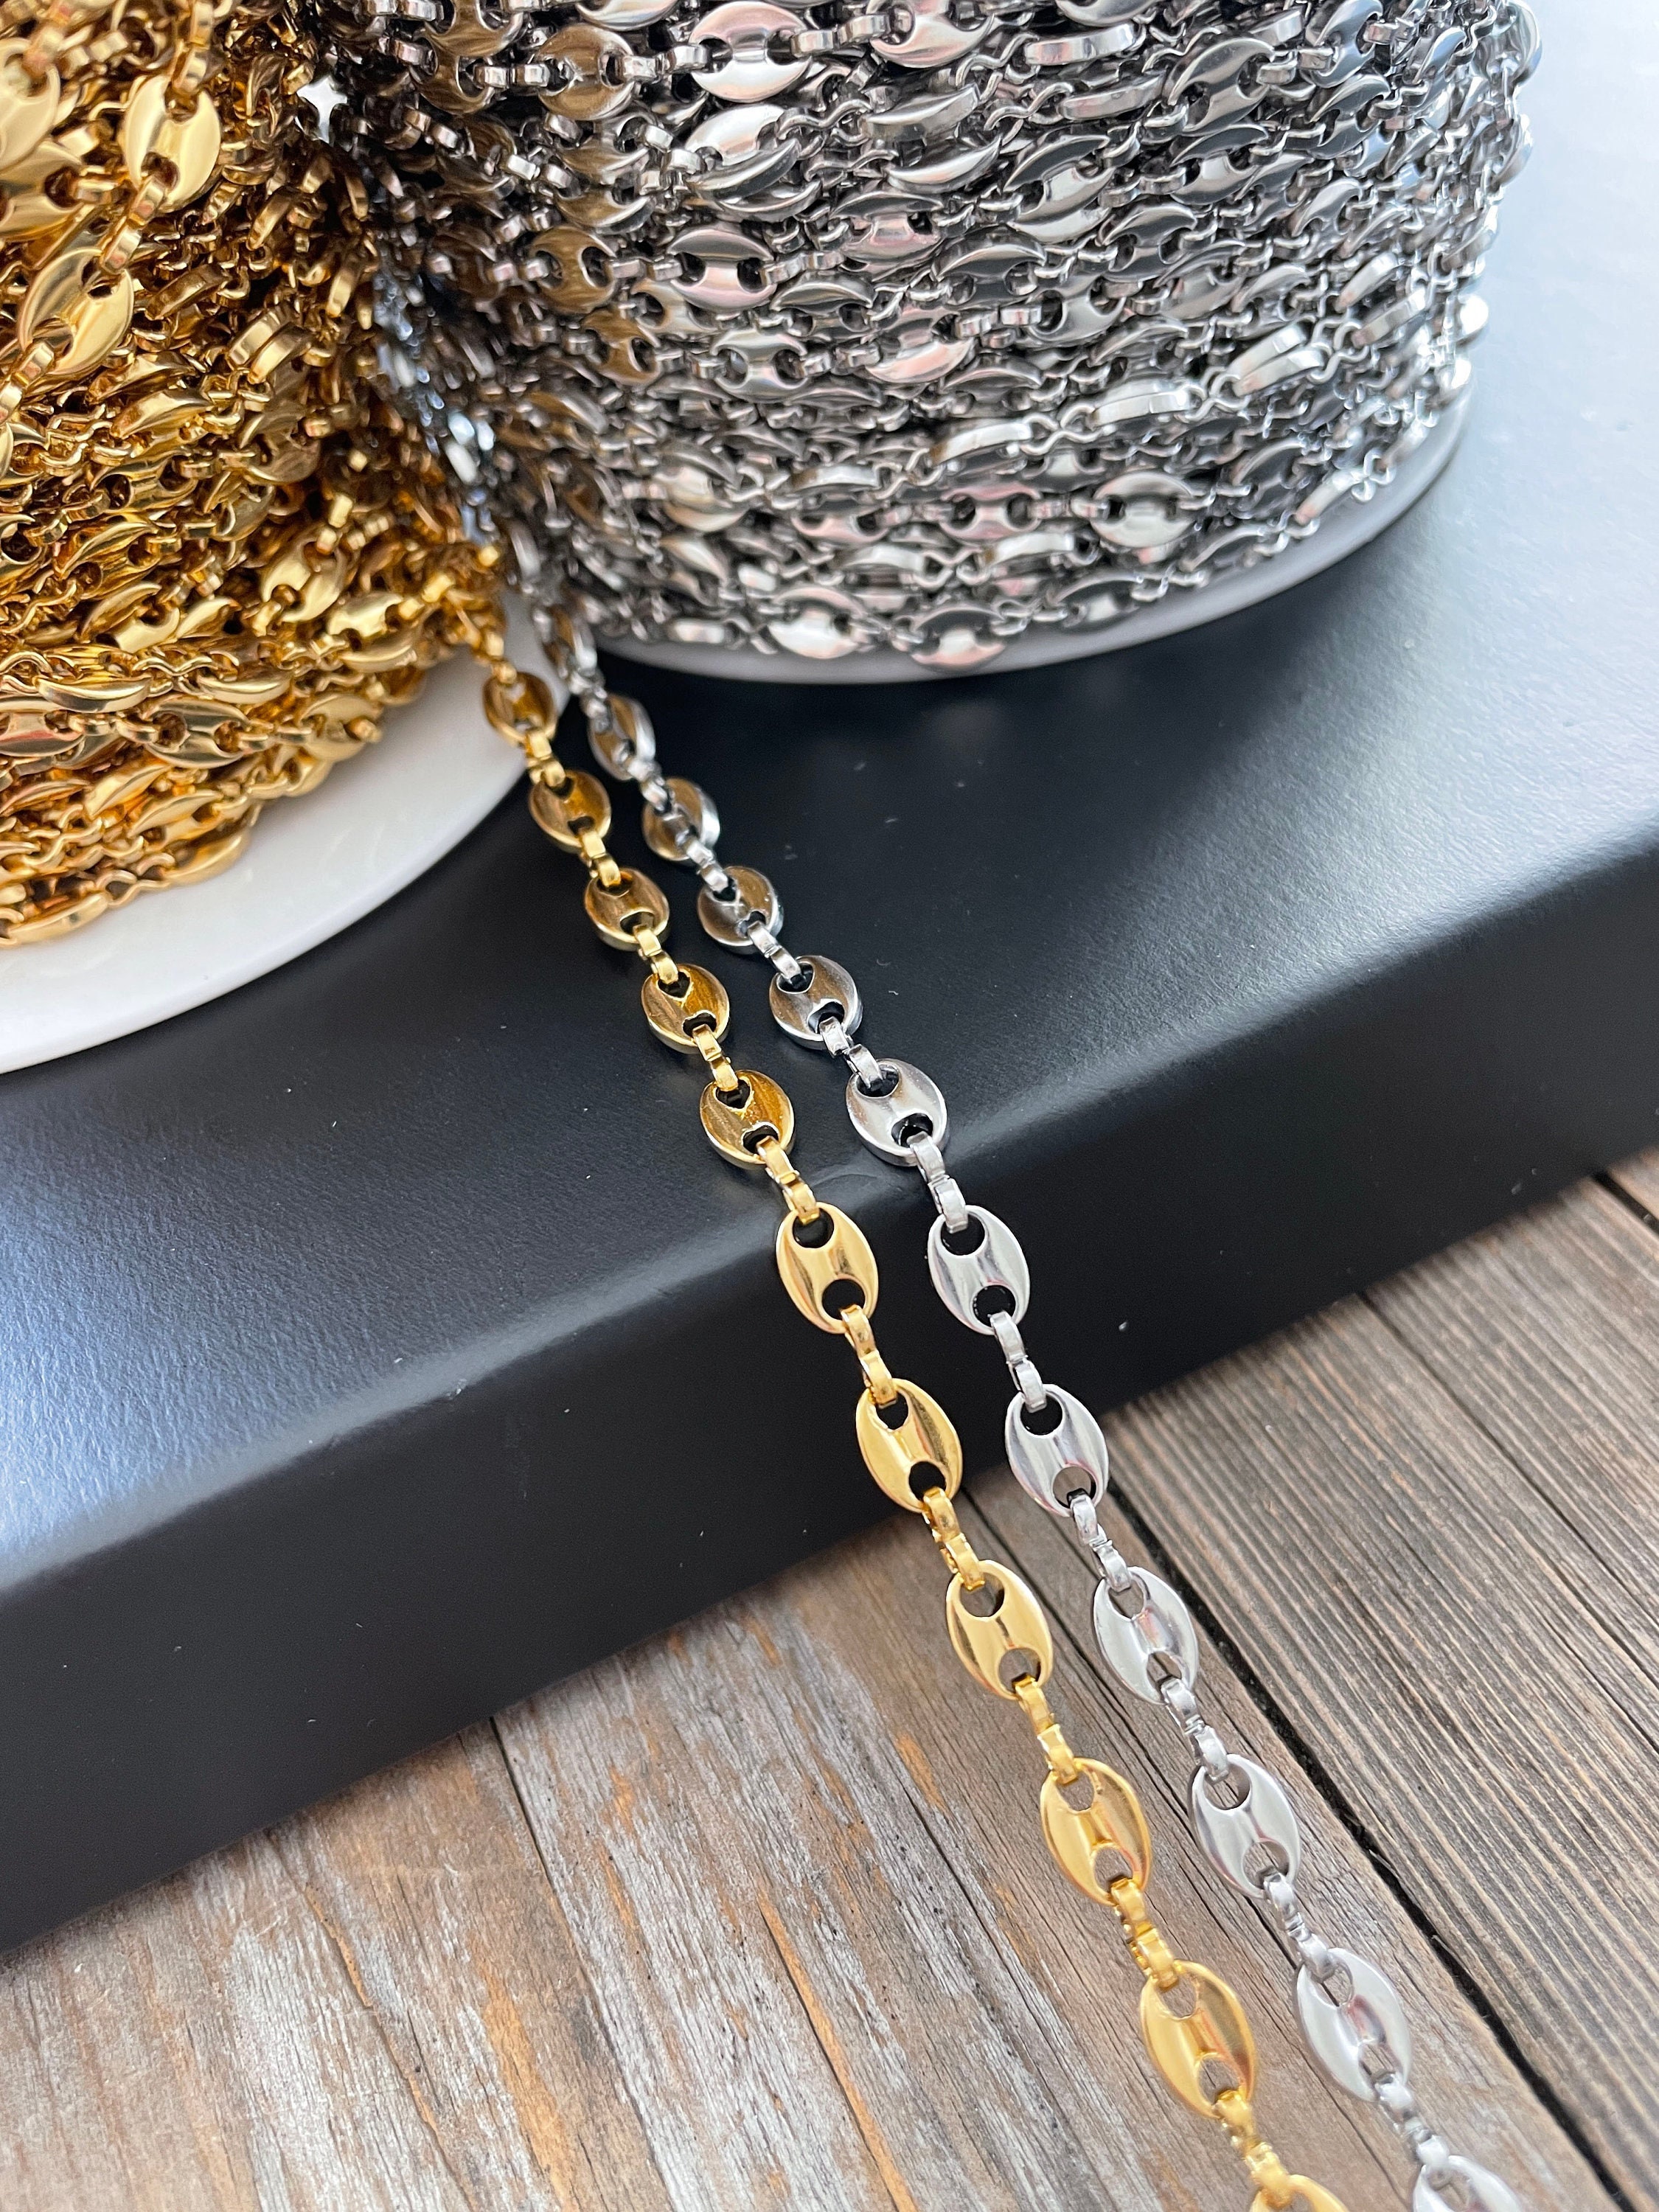 24 Pcs 18 2mm Gold Stainless Steel Necklace Link Cable Chain Lobster Clasp  Bulk for DIY Jewelry Making Supplies Accessories